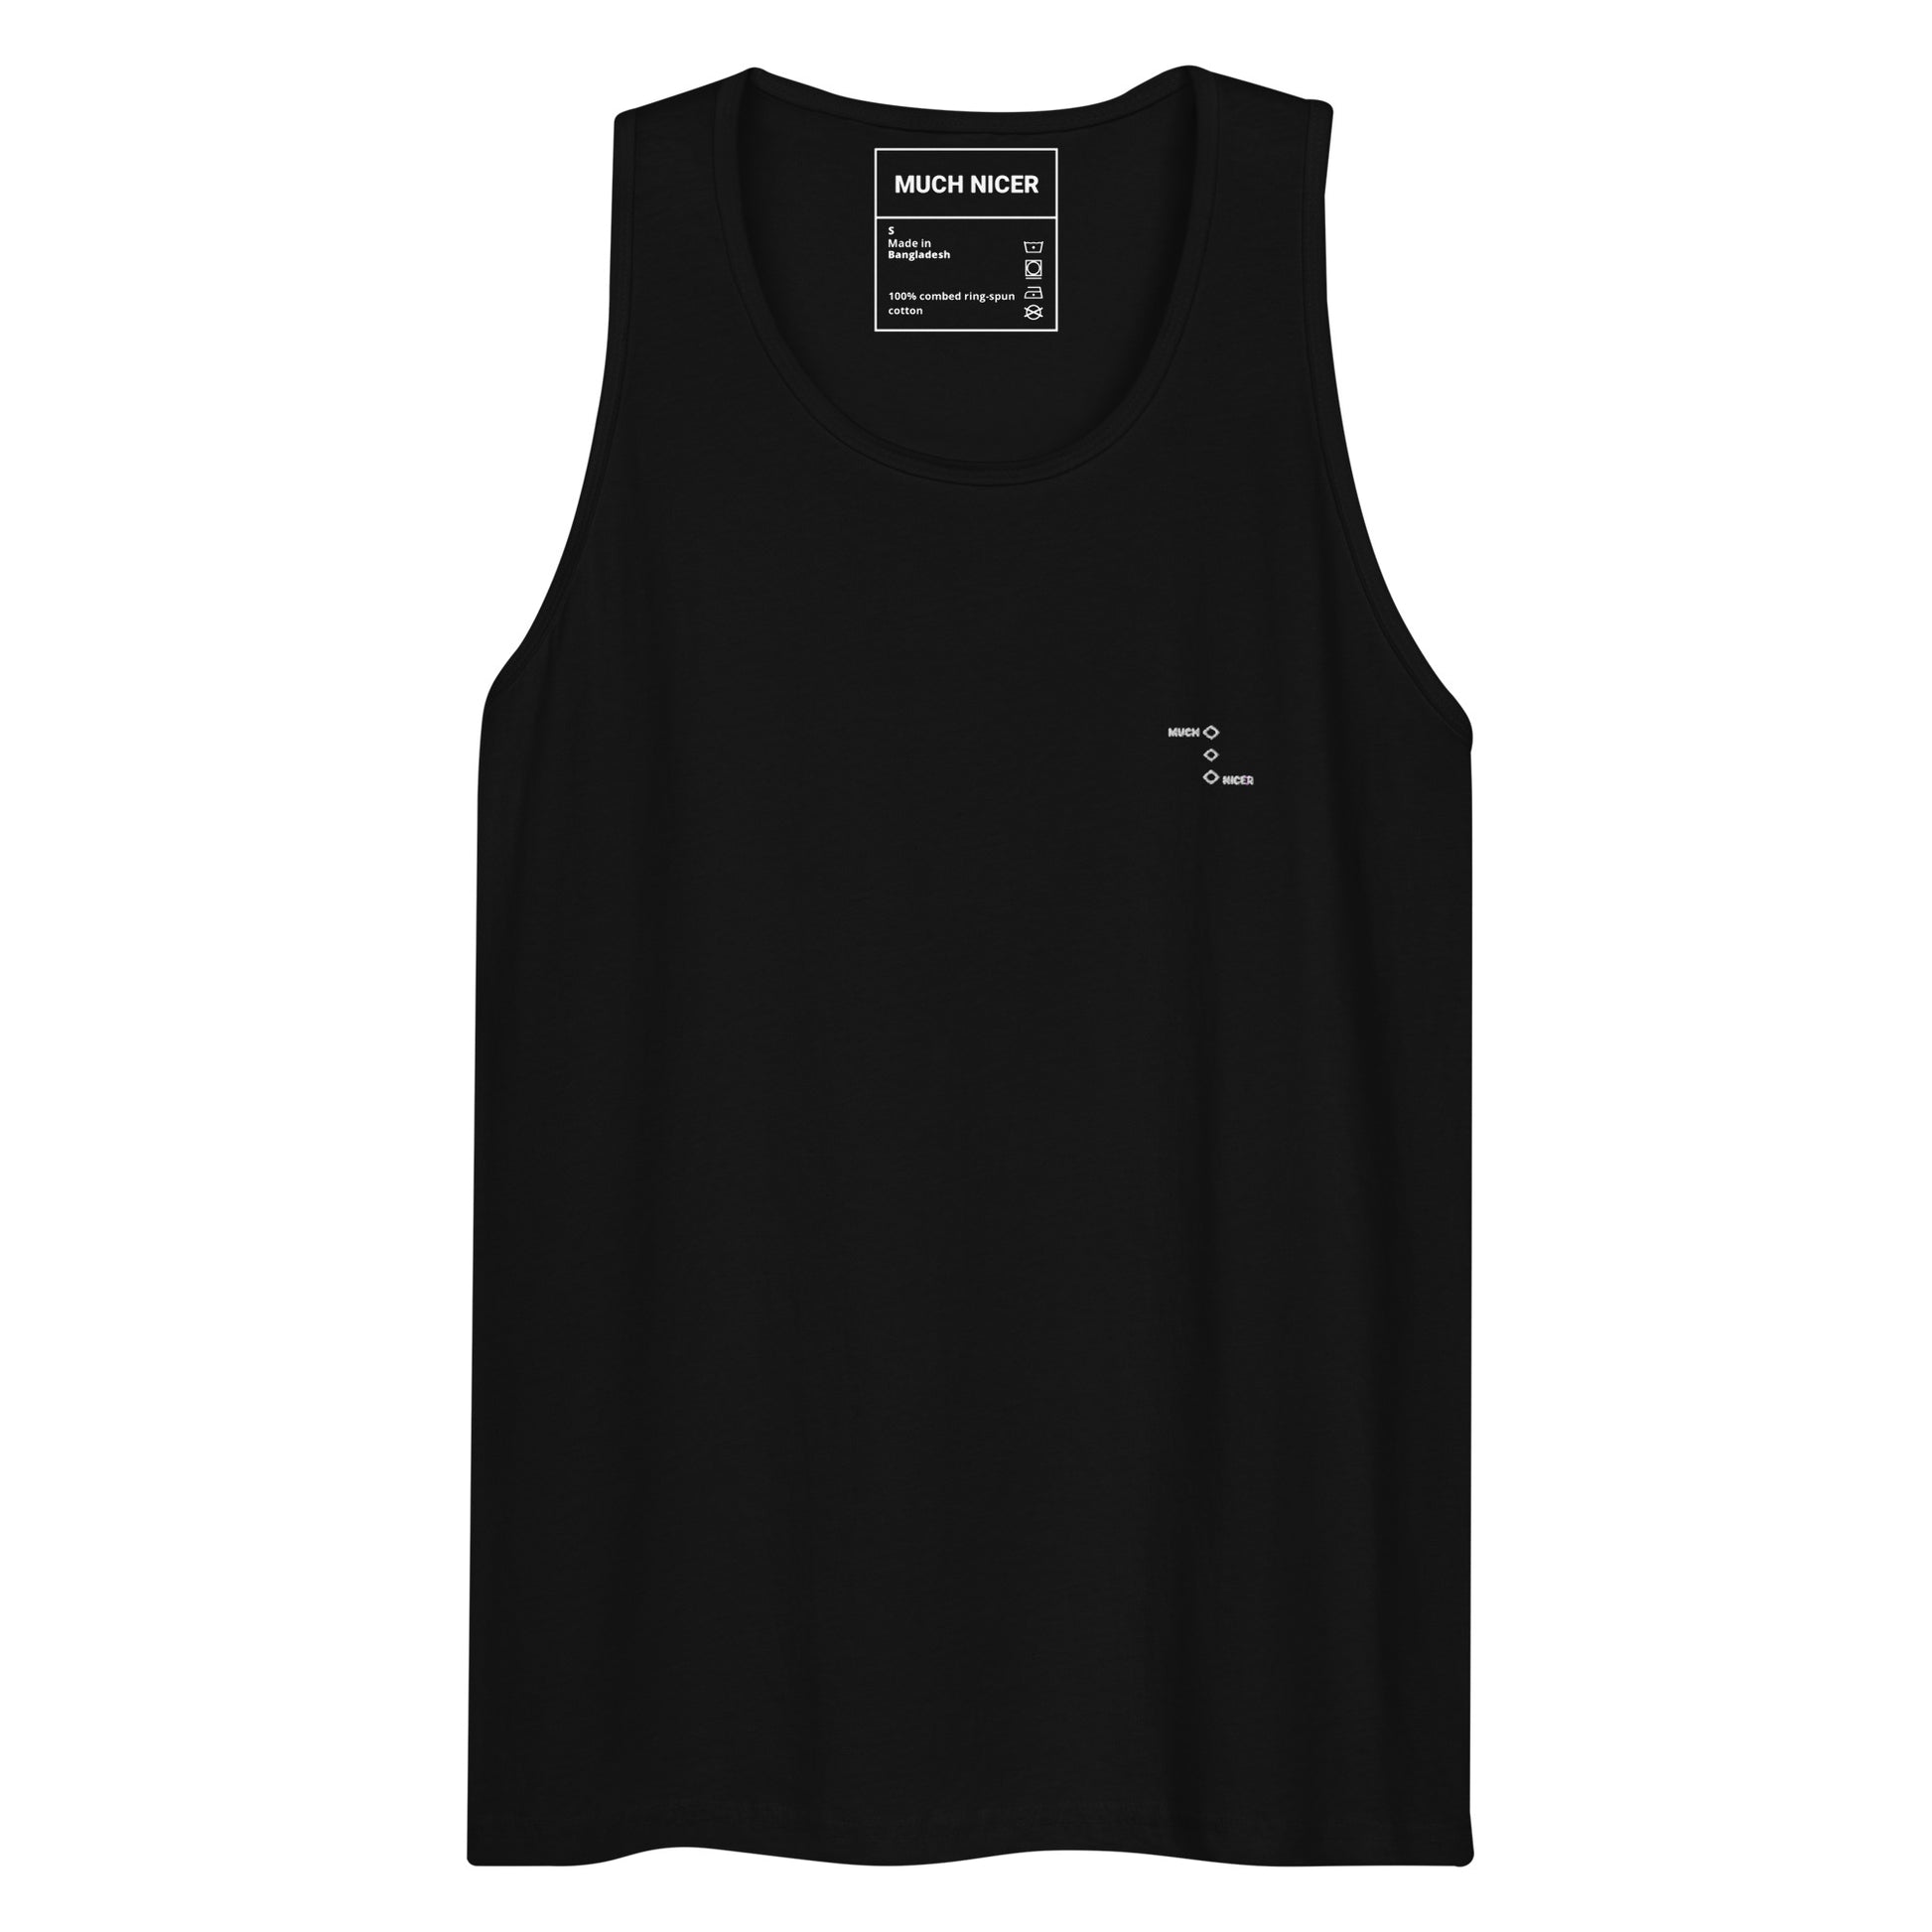 Embroidered and printed tank top - MUCH NICER